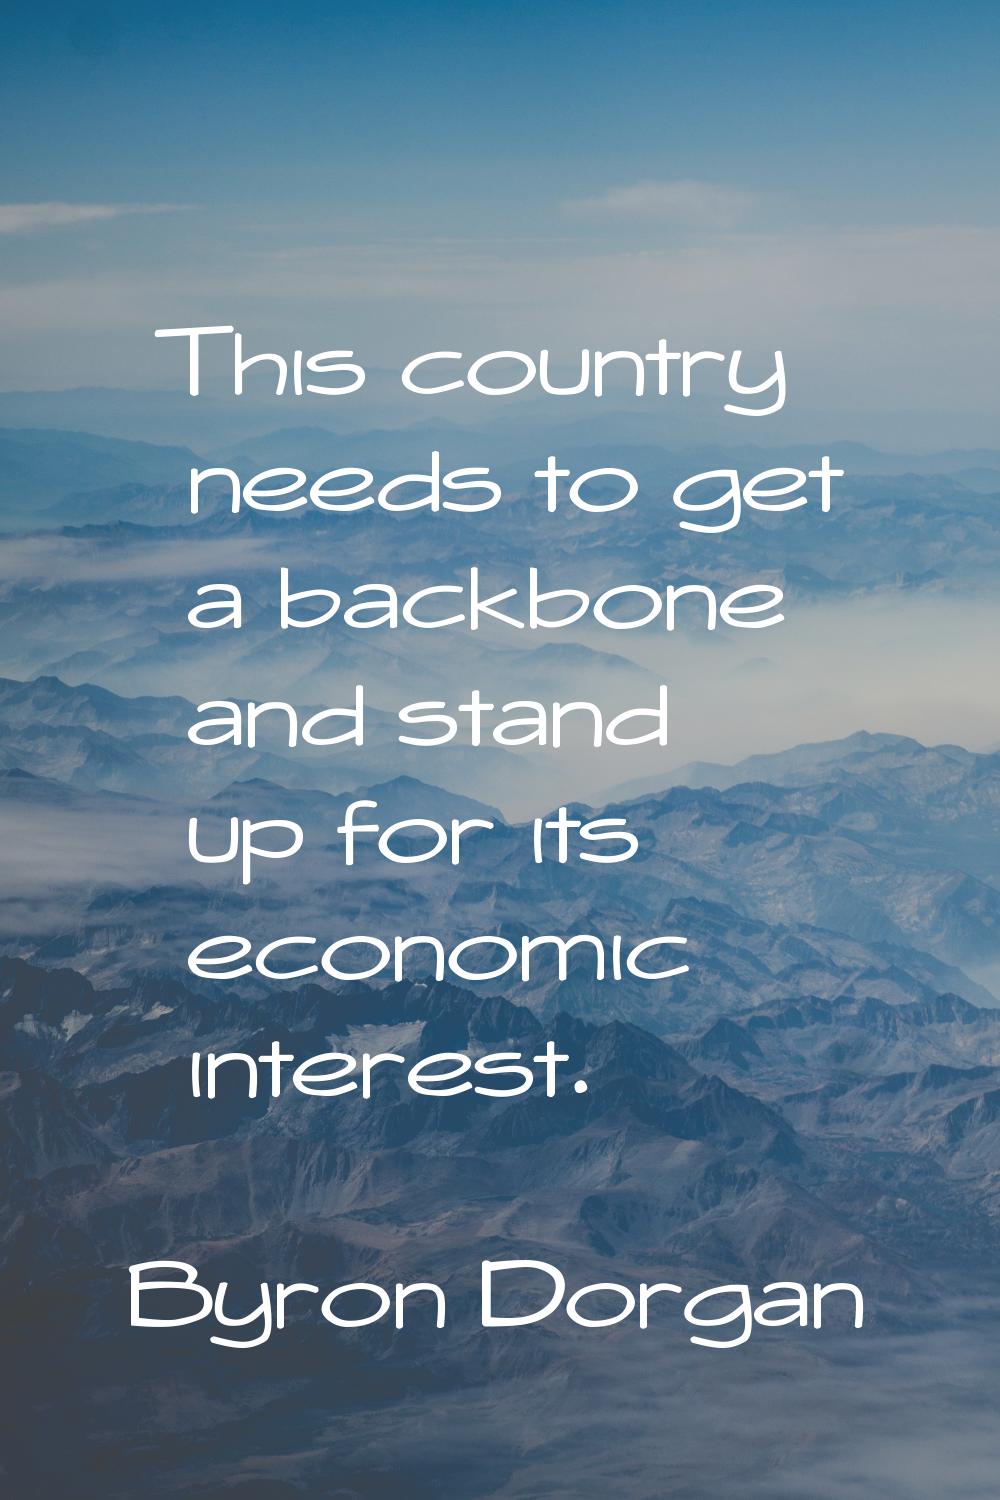 This country needs to get a backbone and stand up for its economic interest.